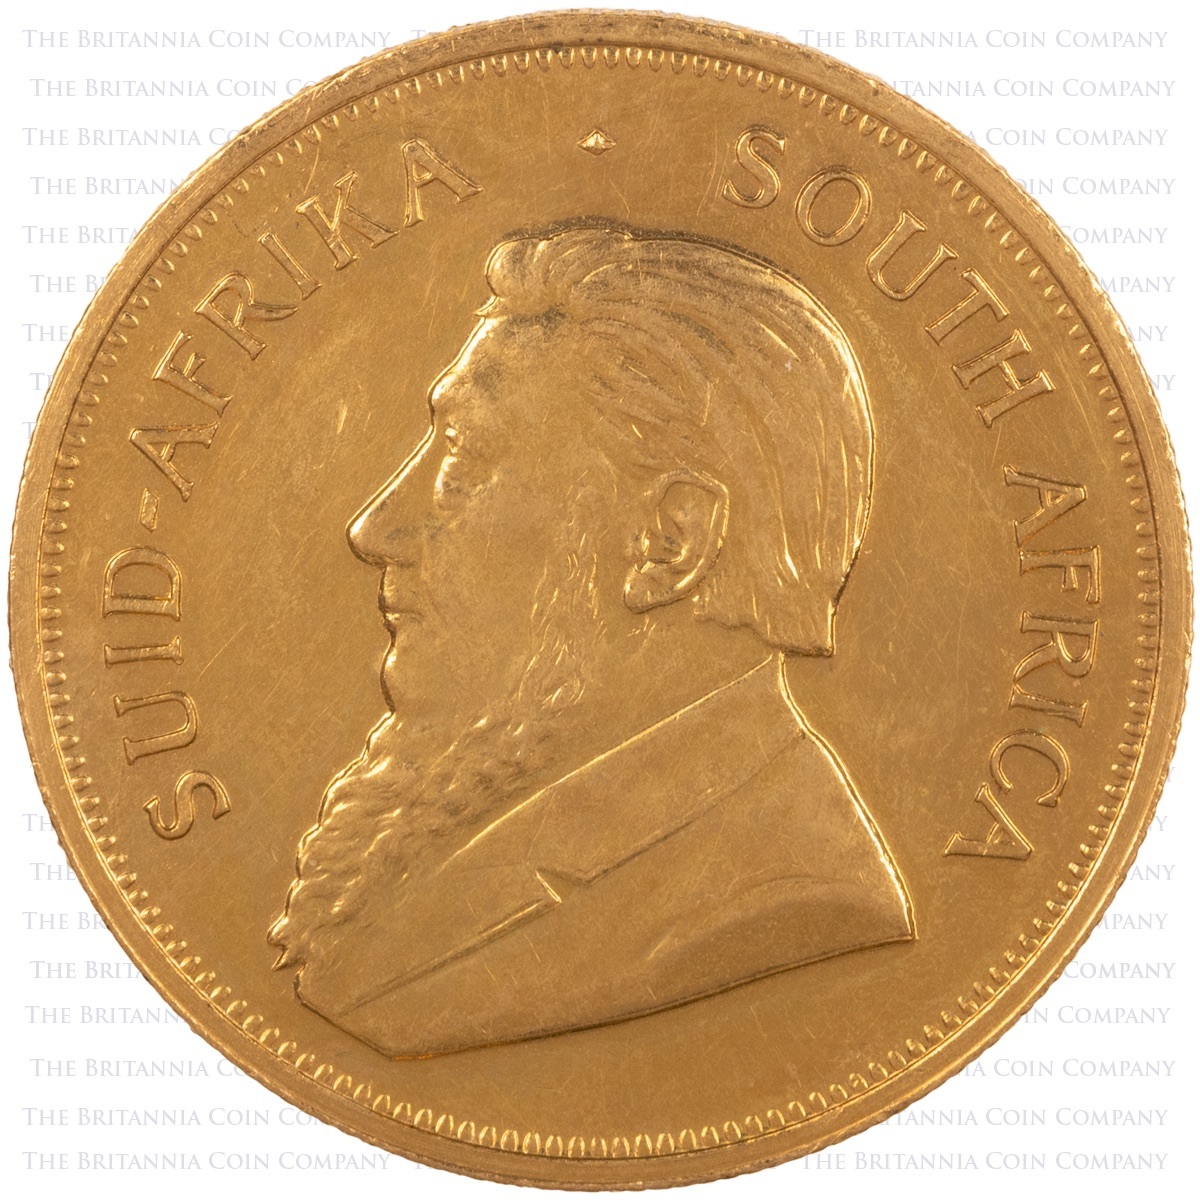 1967 Krugerrand One Ounce Gold South African Coin Obverse